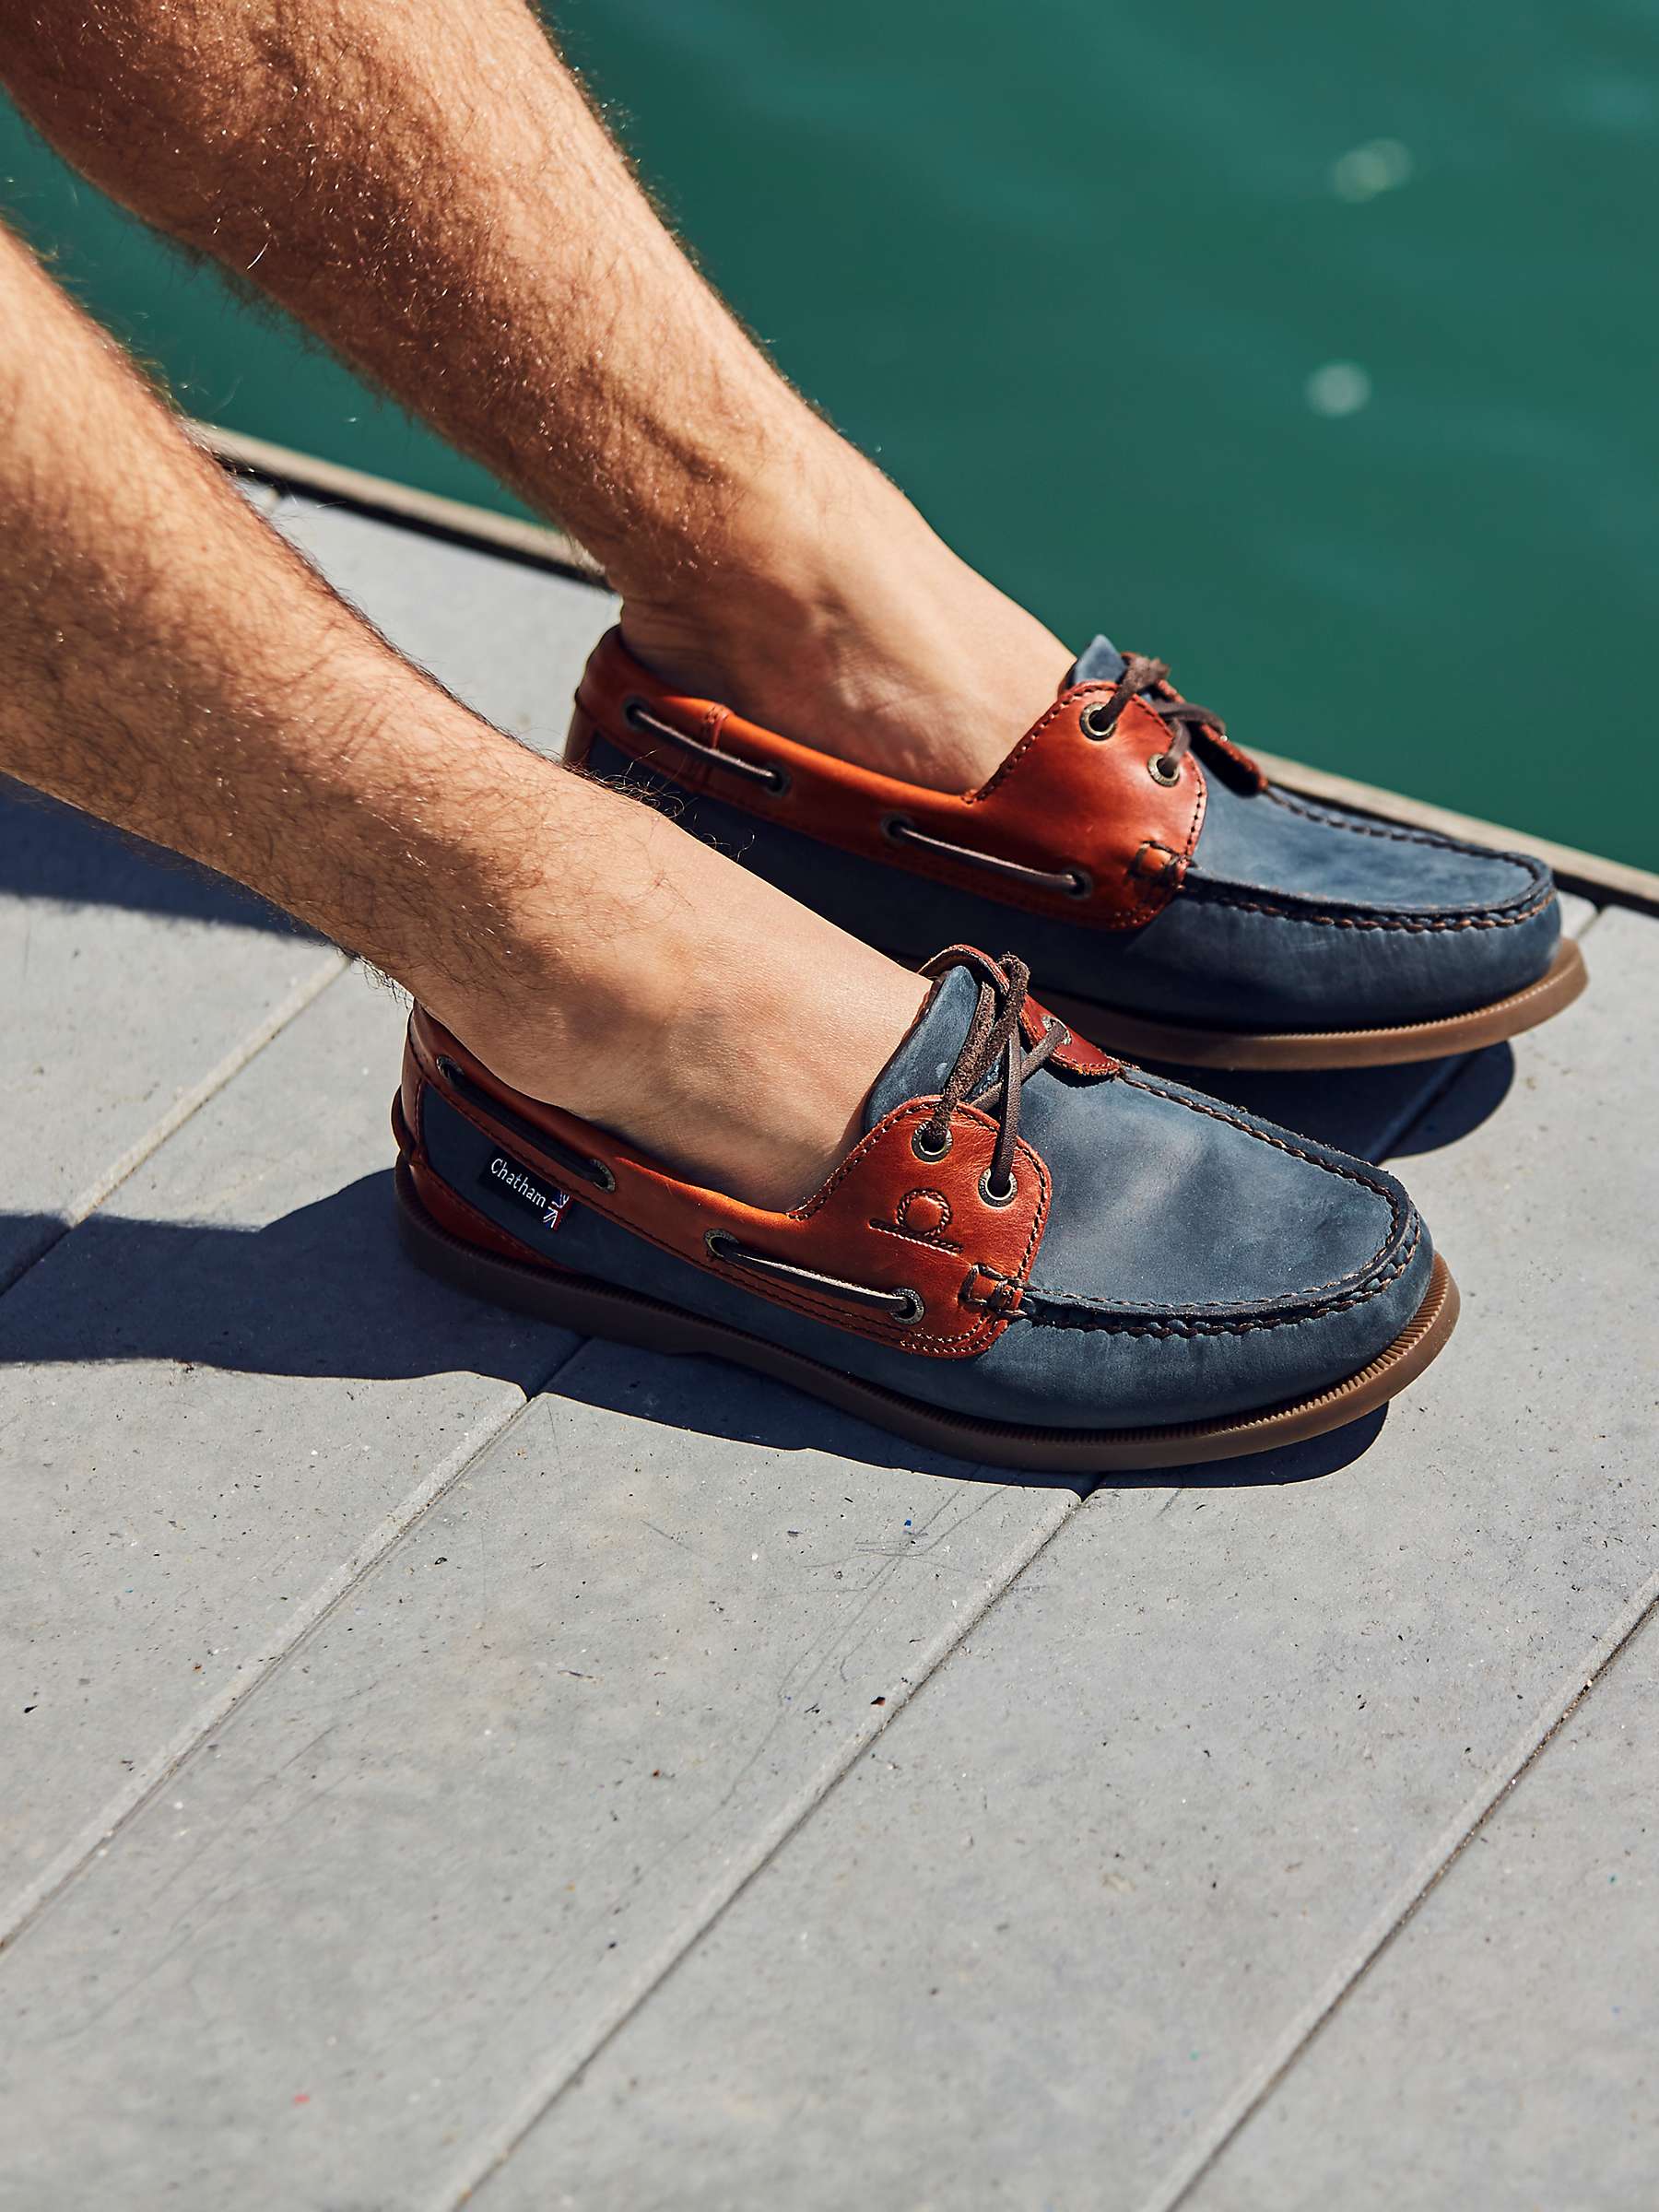 Buy Chatham Bermuda II G2 Leather Boat Shoes, Navy/Seahorse Online at johnlewis.com